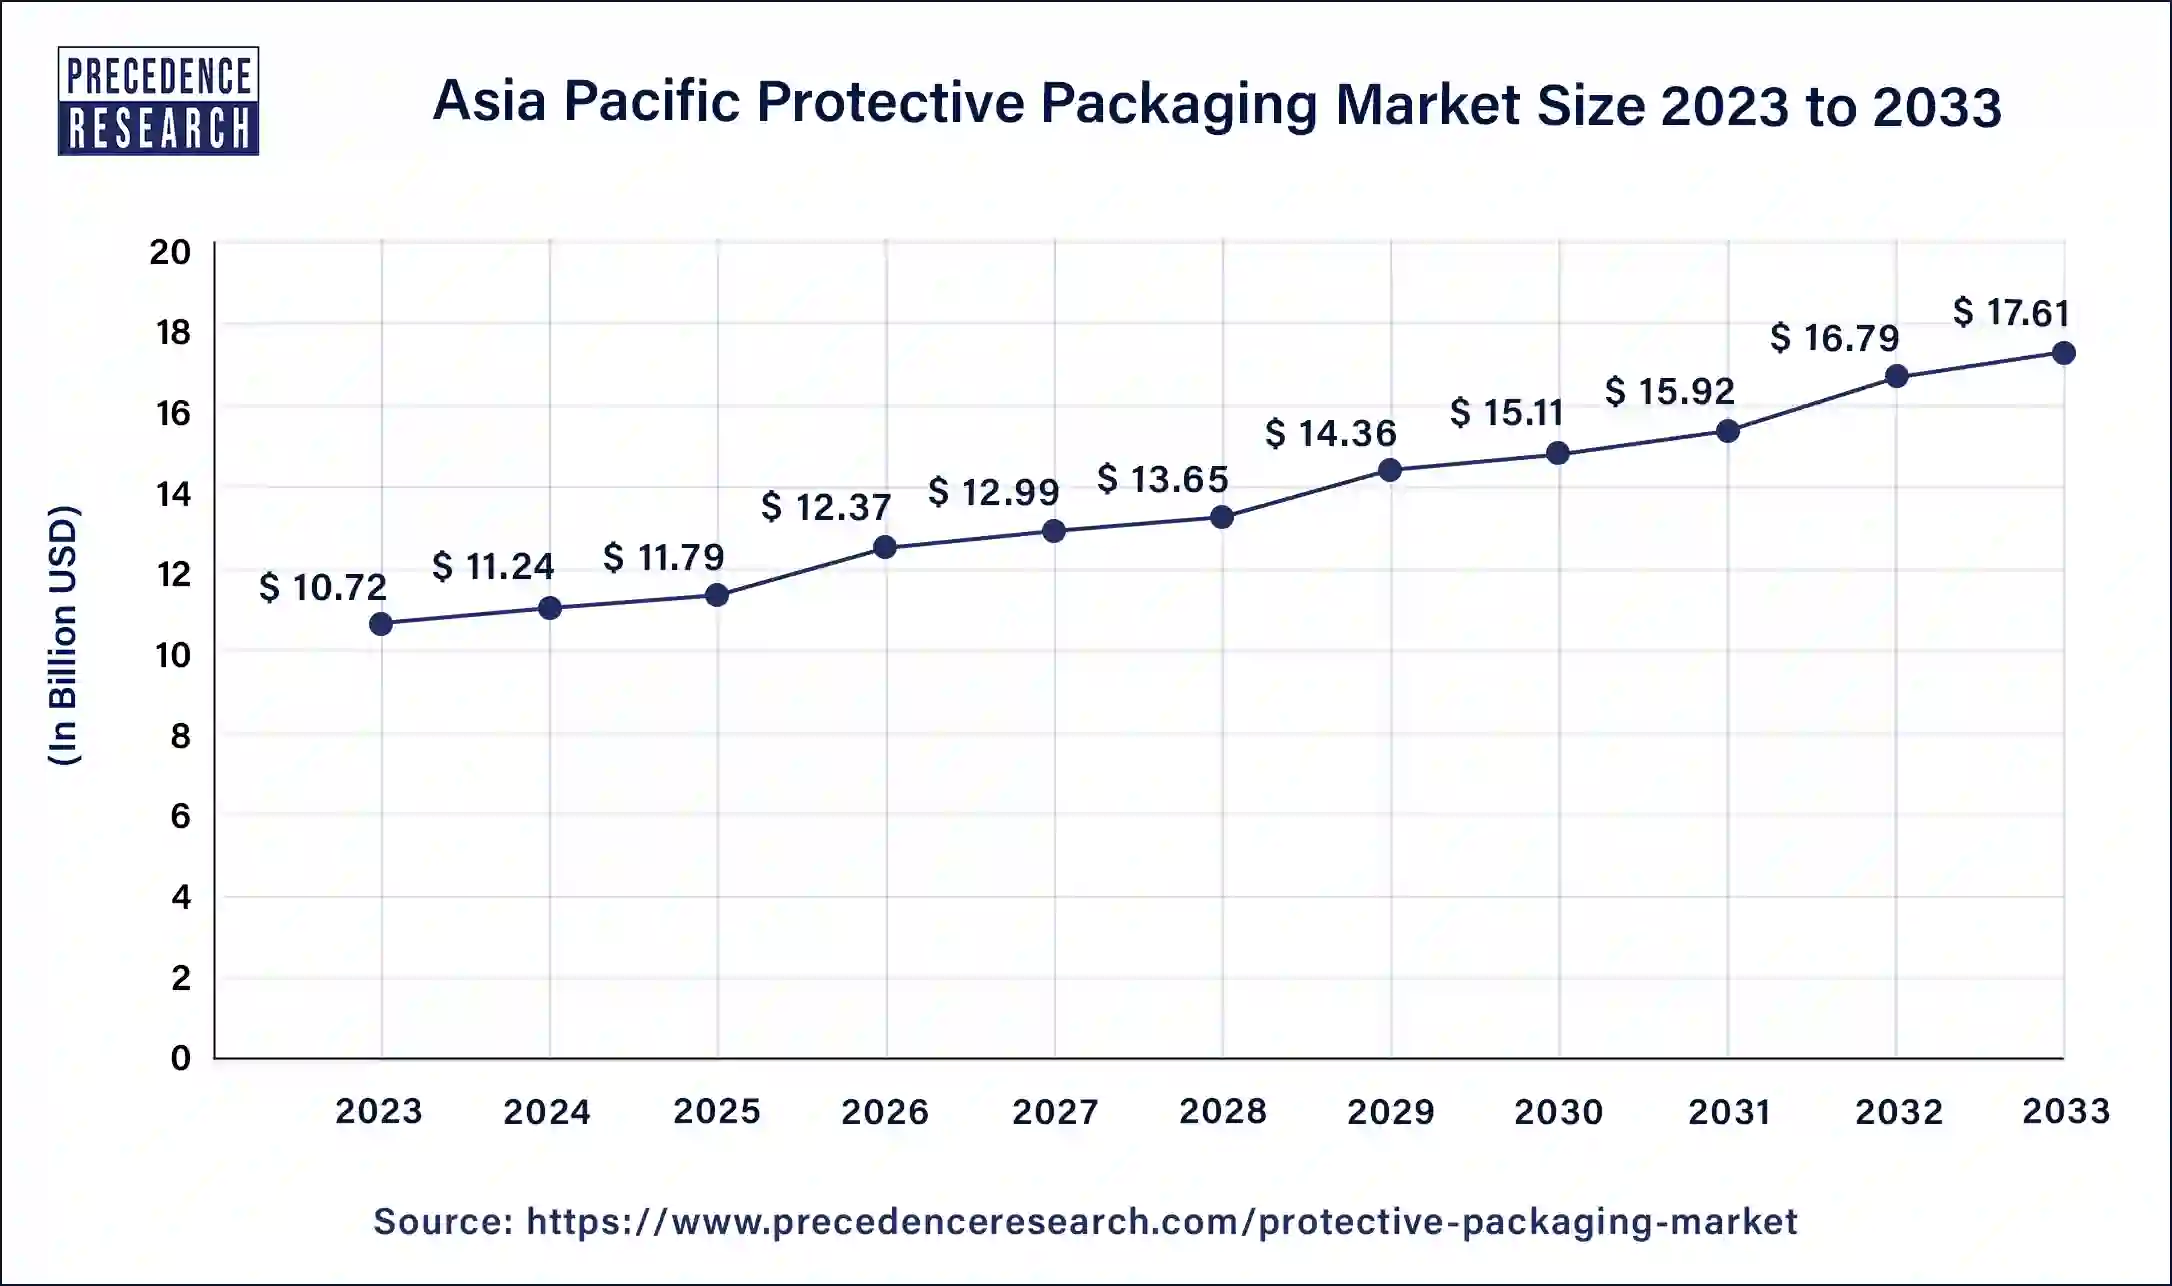 Asia Pacific Protective Packaging Market Size 2024 to 2033